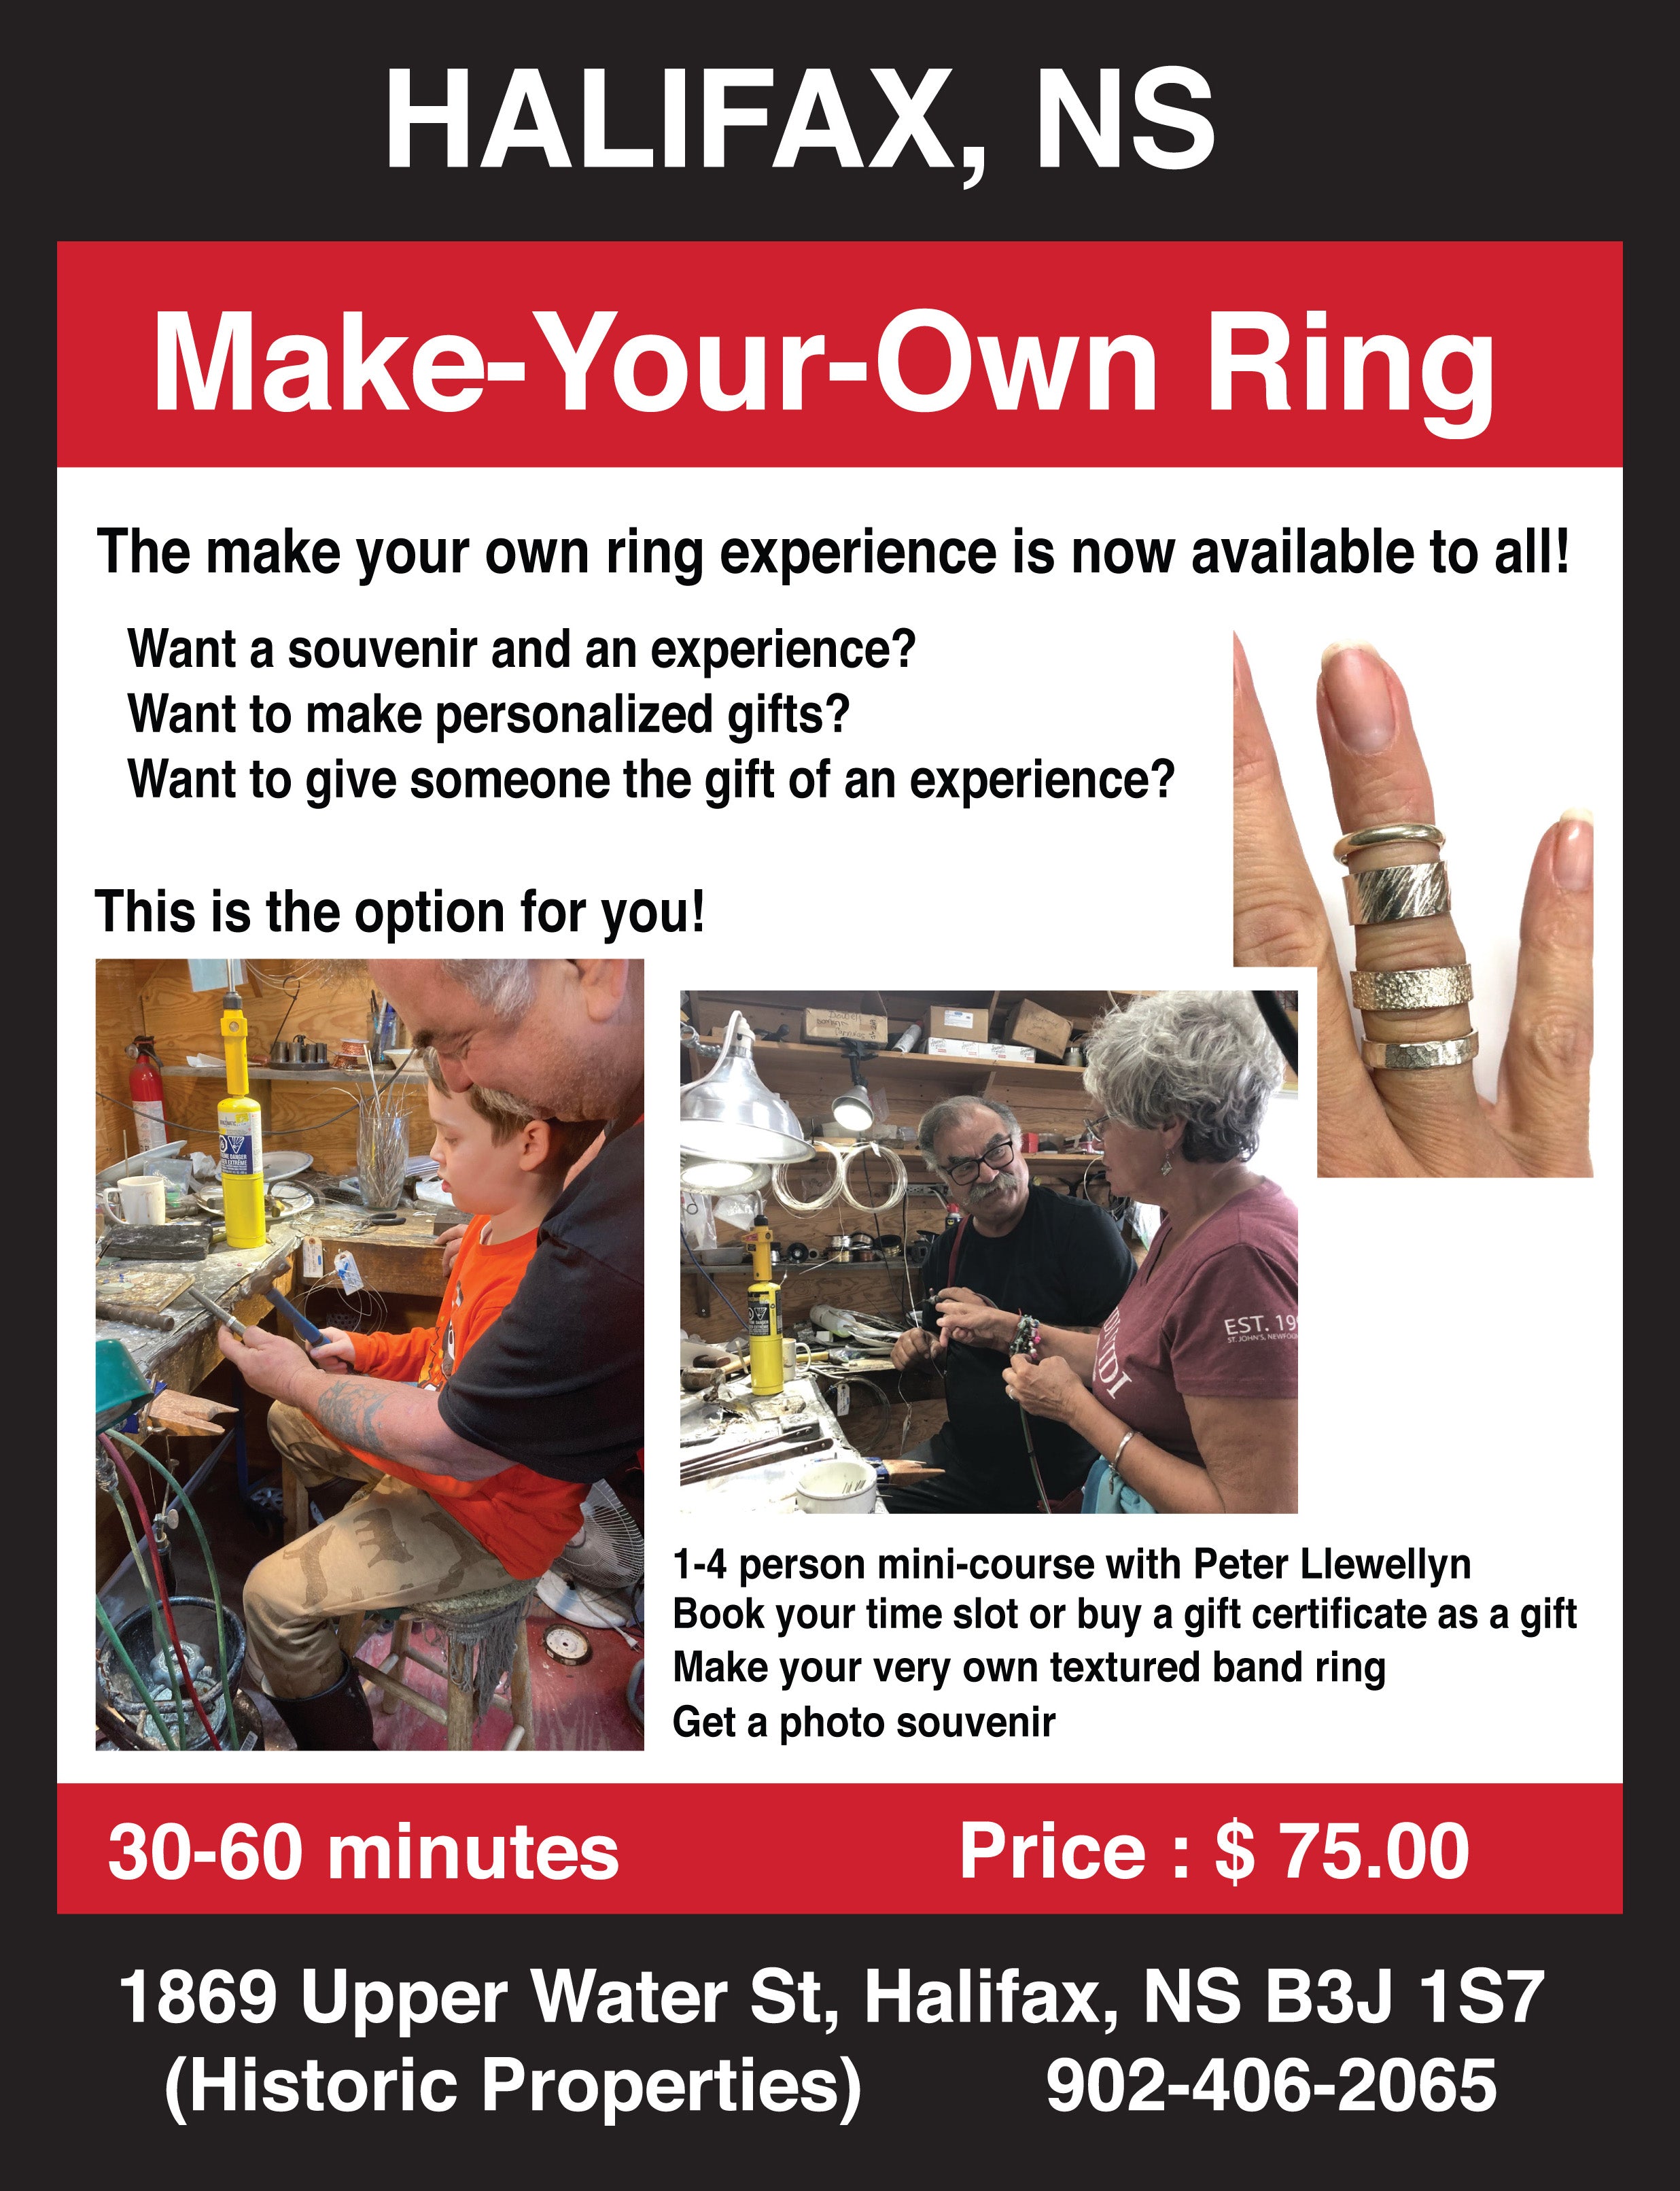 Make Your Own Ring - Halifax